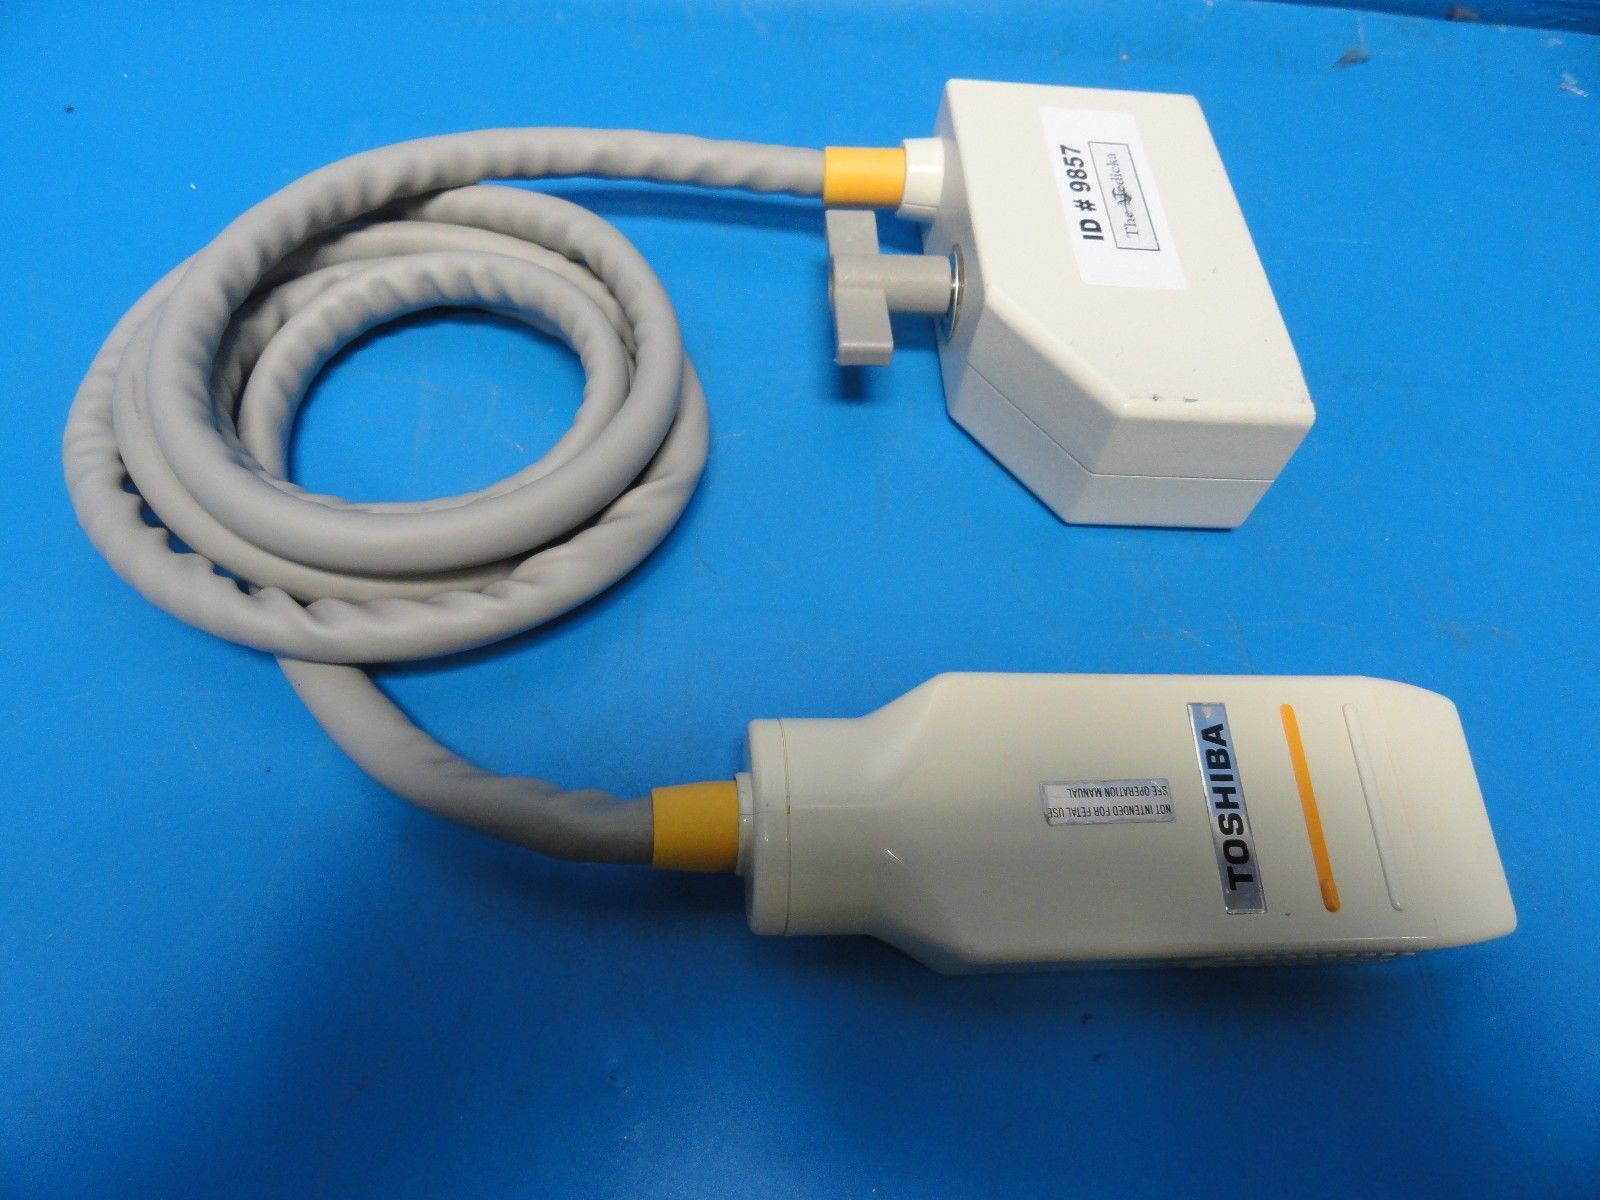 Toshiba PLF-703ST Linear Array Ultrasound Transducer for Sonolayer SSA-270A/9857 DIAGNOSTIC ULTRASOUND MACHINES FOR SALE